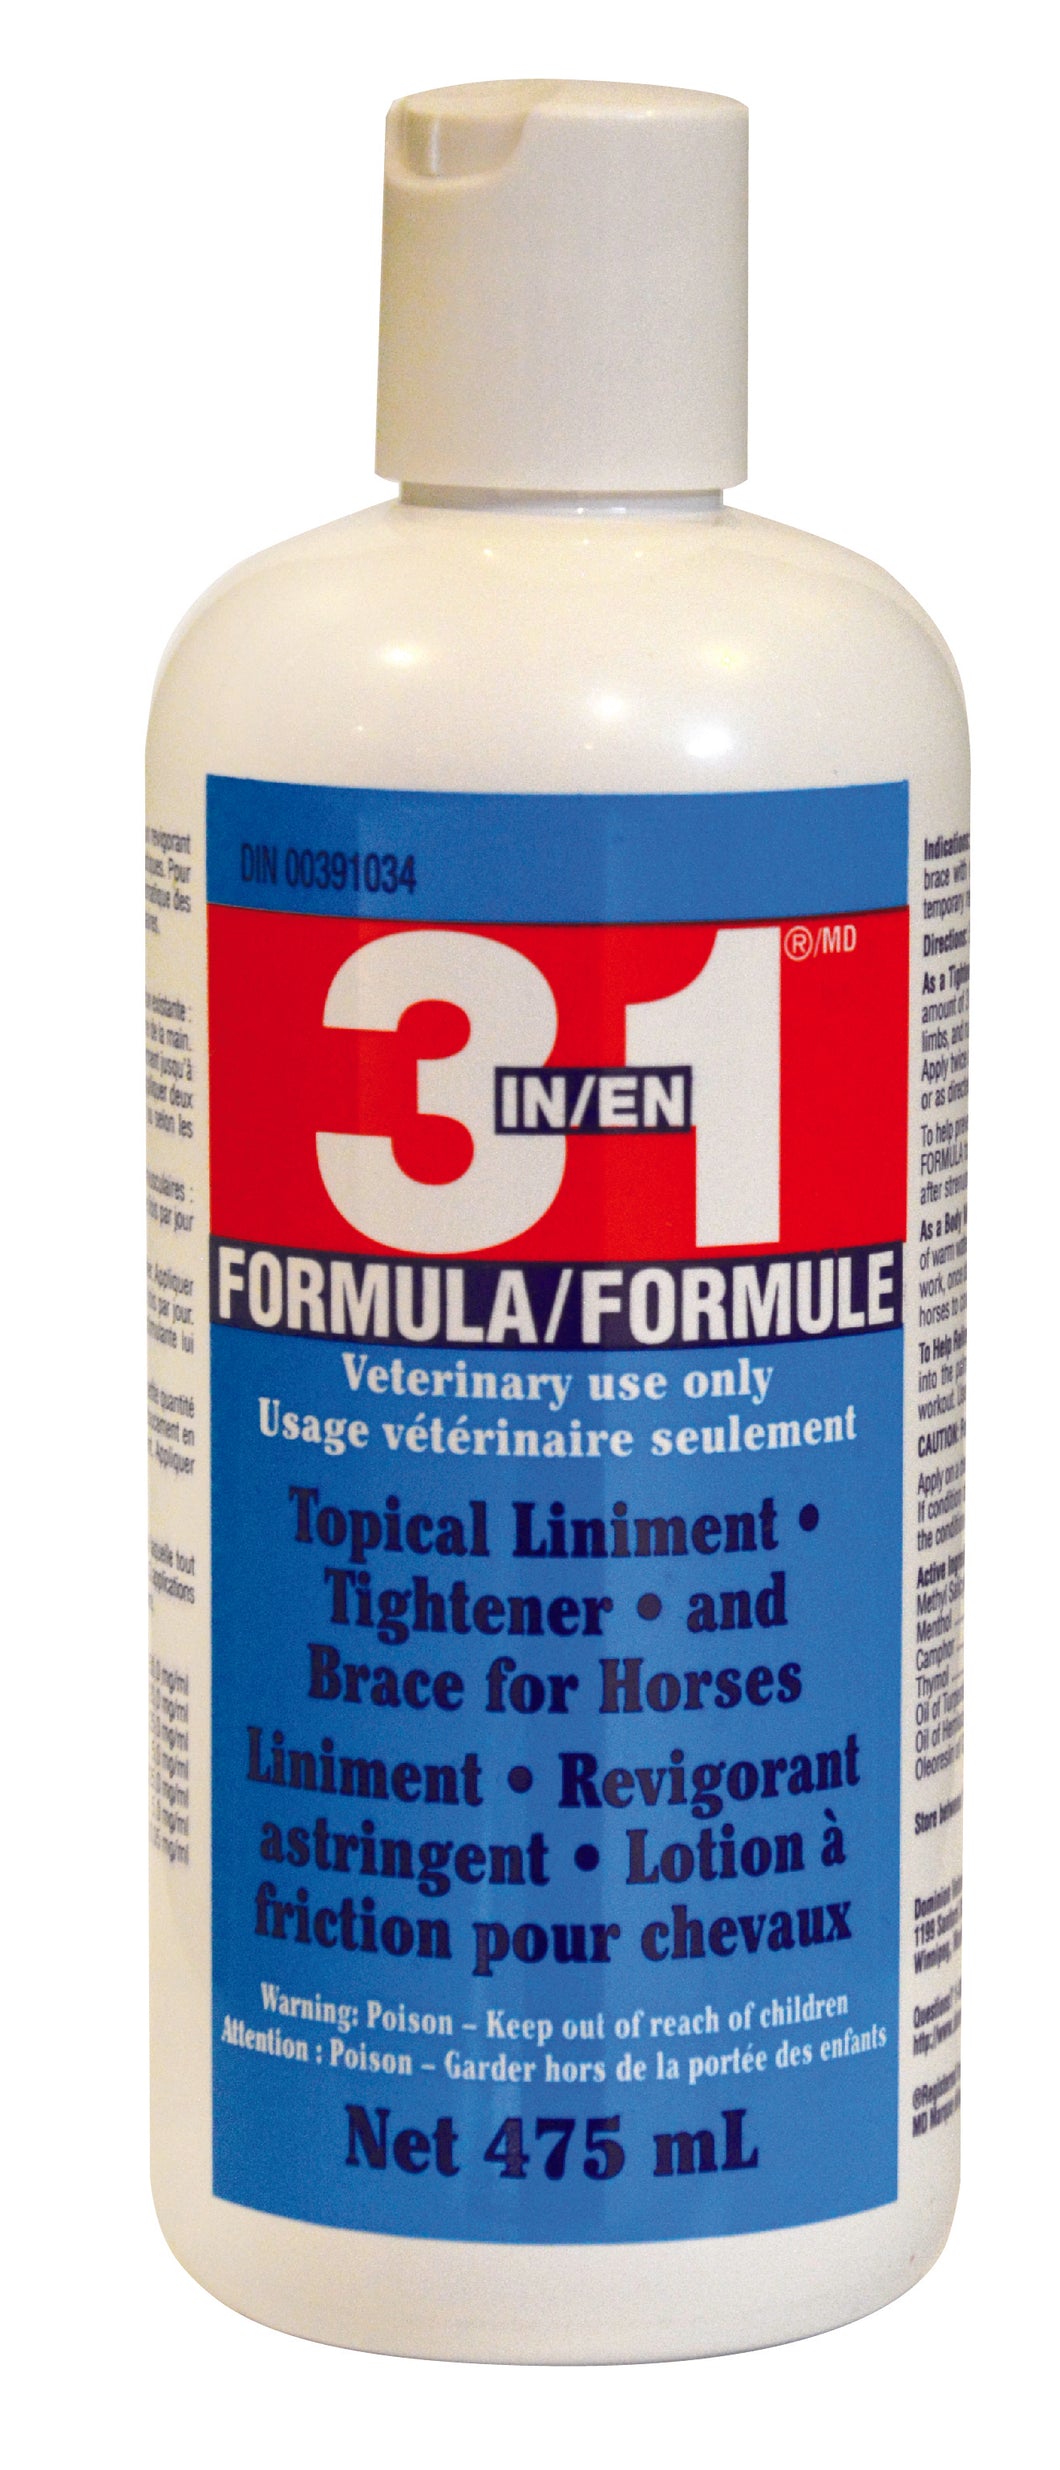 3 IN 1 FORMULA,  475 ml.  Horse supply topical liniment, tightener.